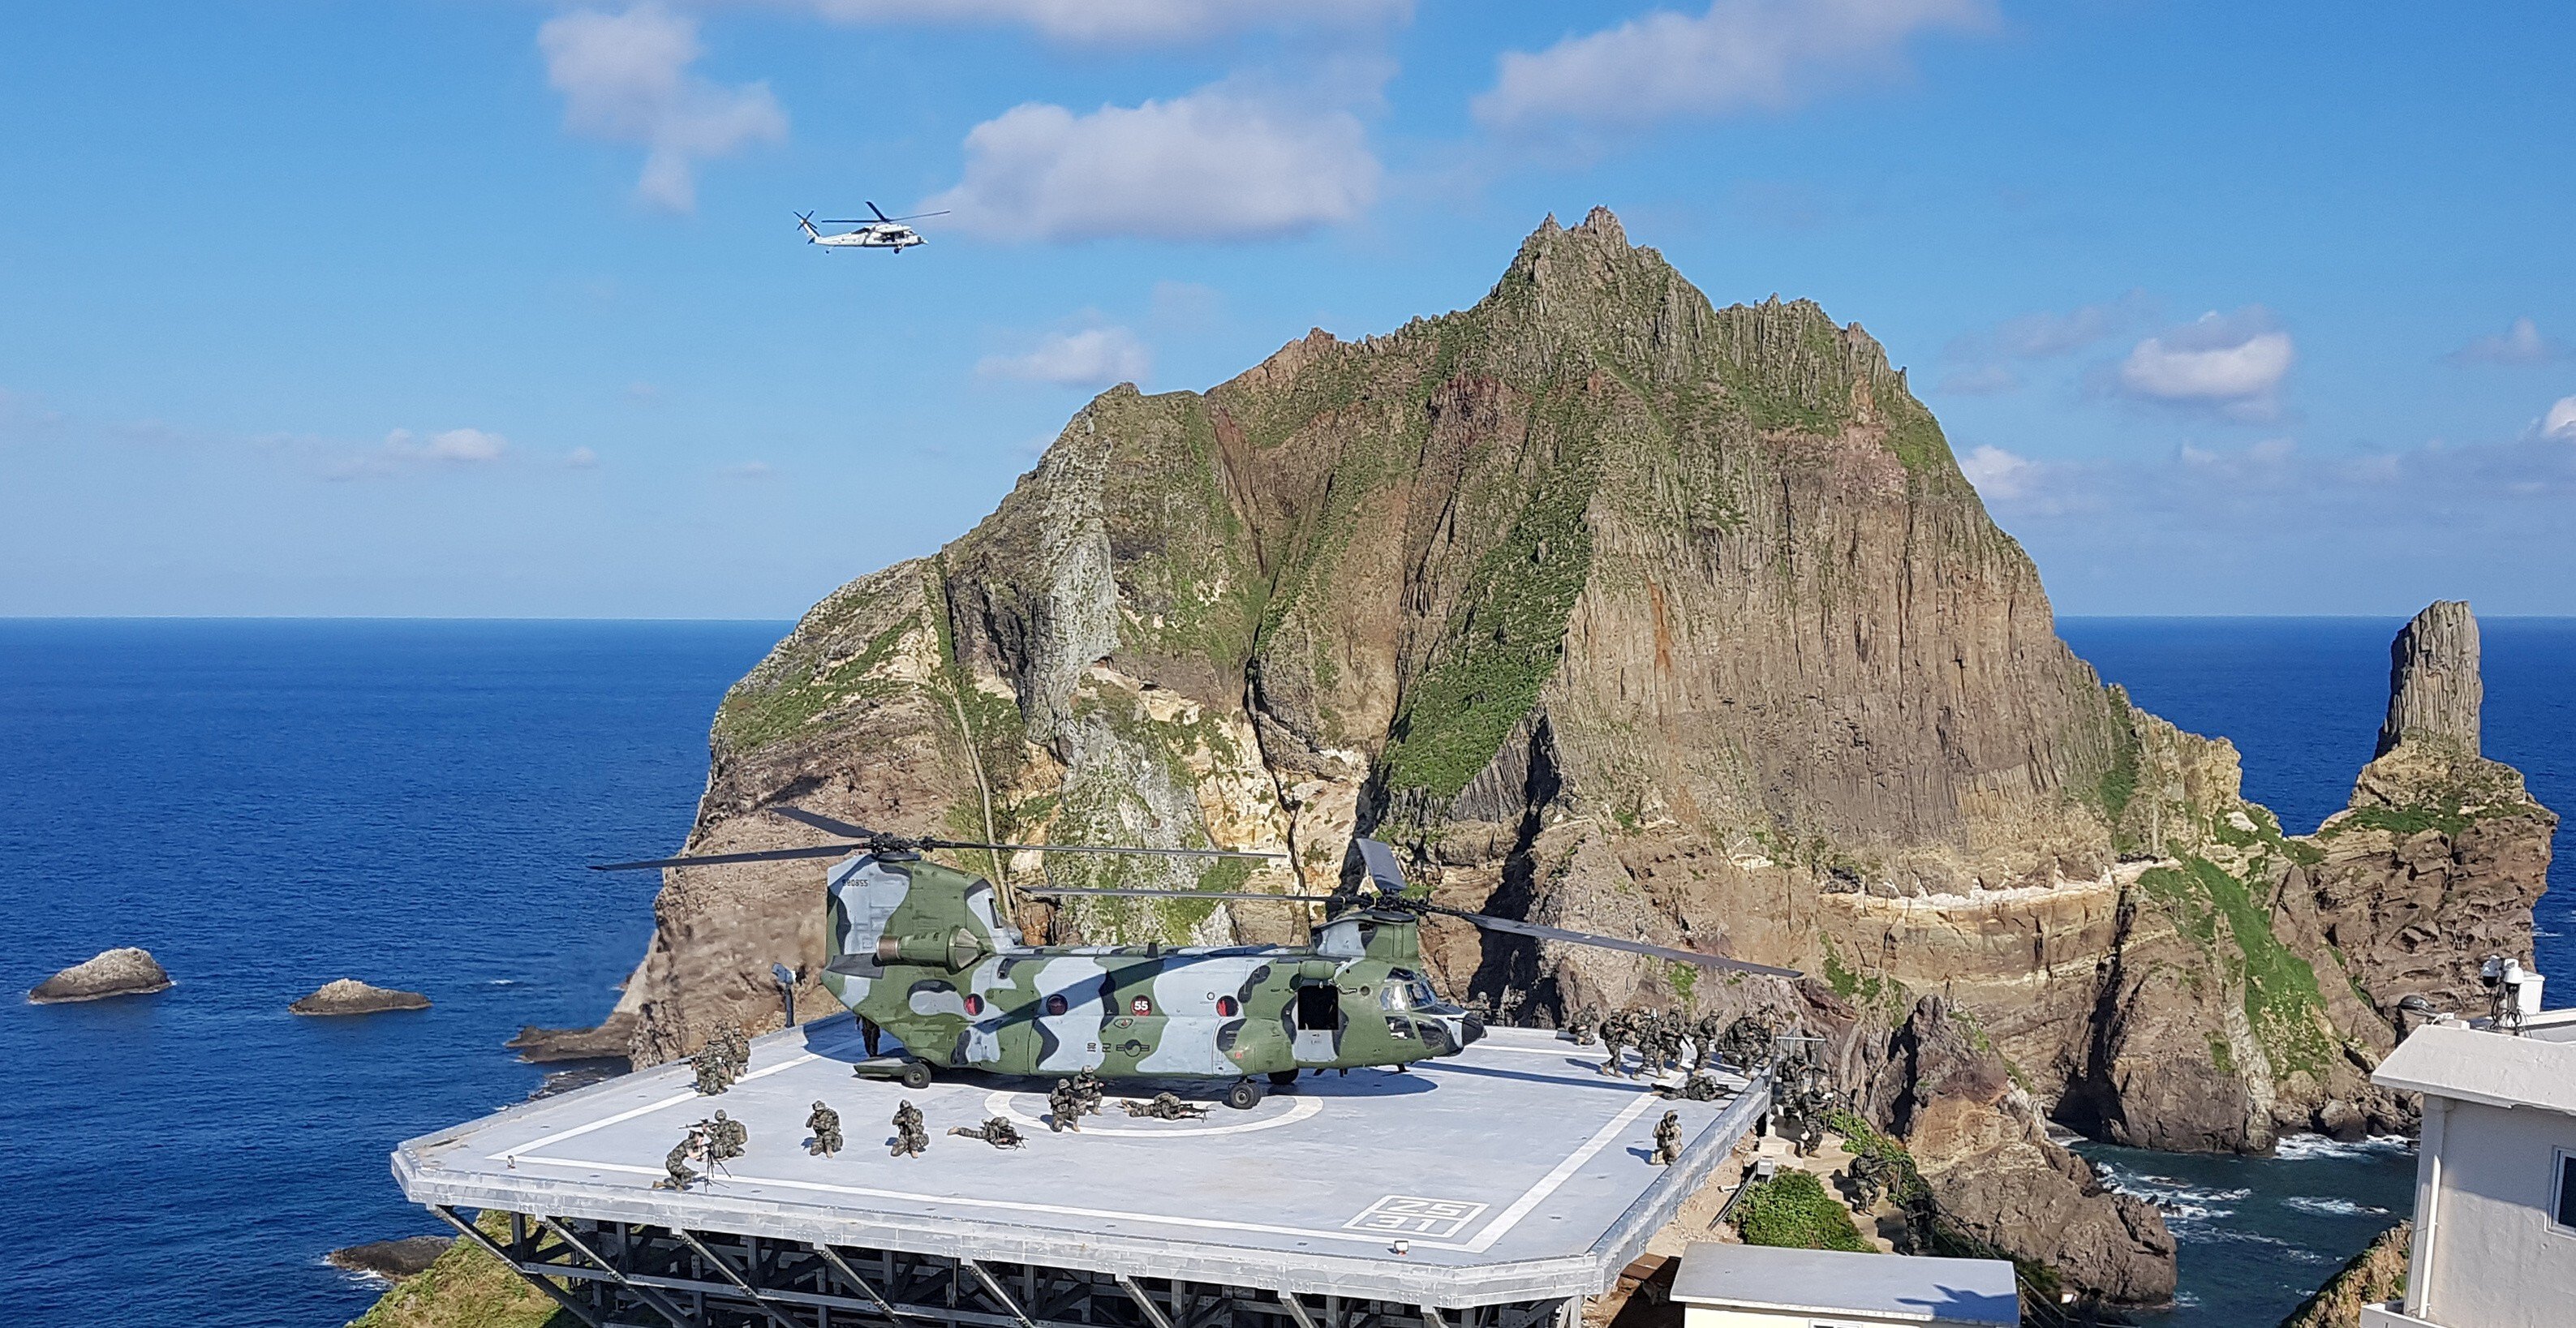 South Korean Marines take part in a military exercise on the Dokdo islets in 2019. Photo: South Korean Navy/Yonhap via Reuters